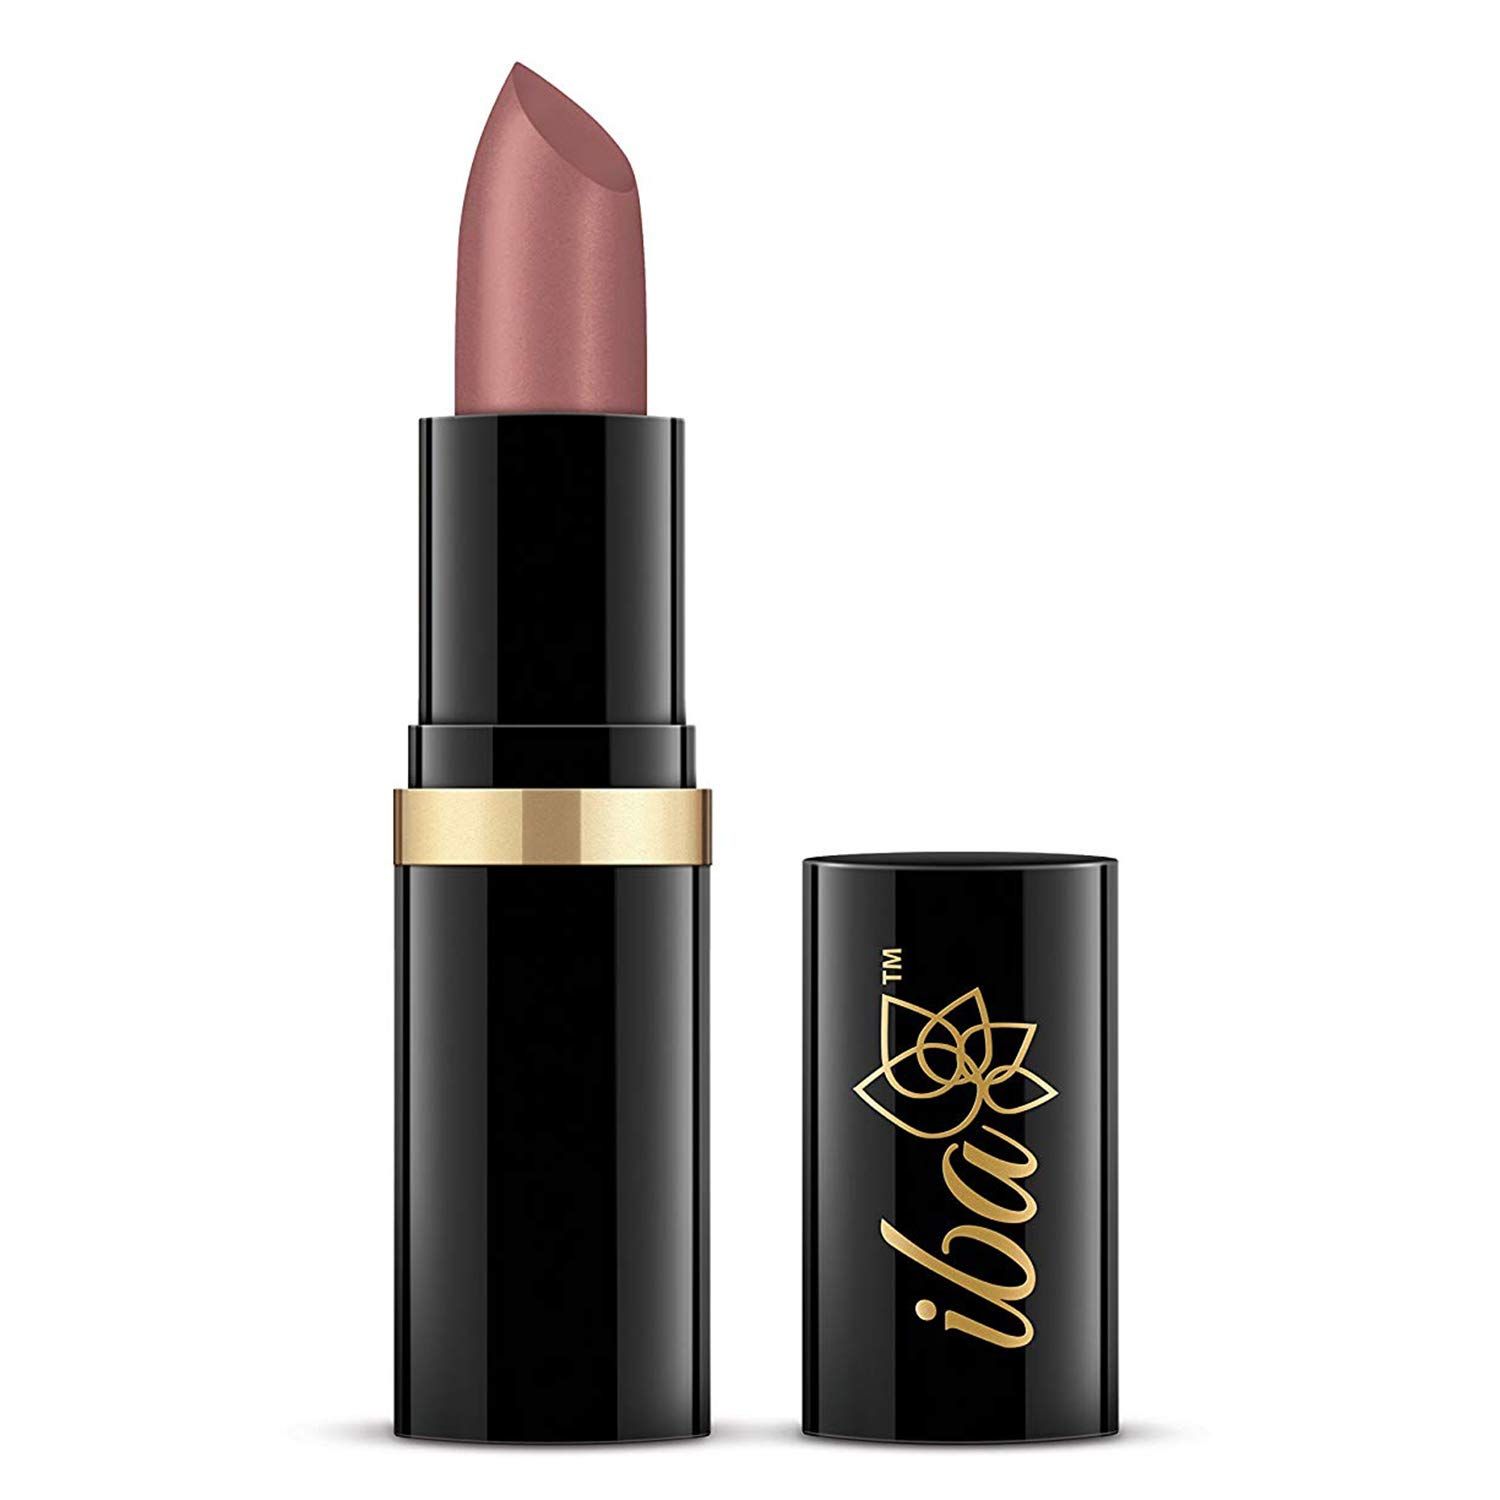 Iba Pure Lips Moisturizing Lipstick Shade A45 Glossy Natural, 4g | Intense Colour | Highly Pigmented and Creamy Long Lasting | Glossy Finish | Enriched with Vitamin E | 100% Natural, Vegan & Cruelty Free